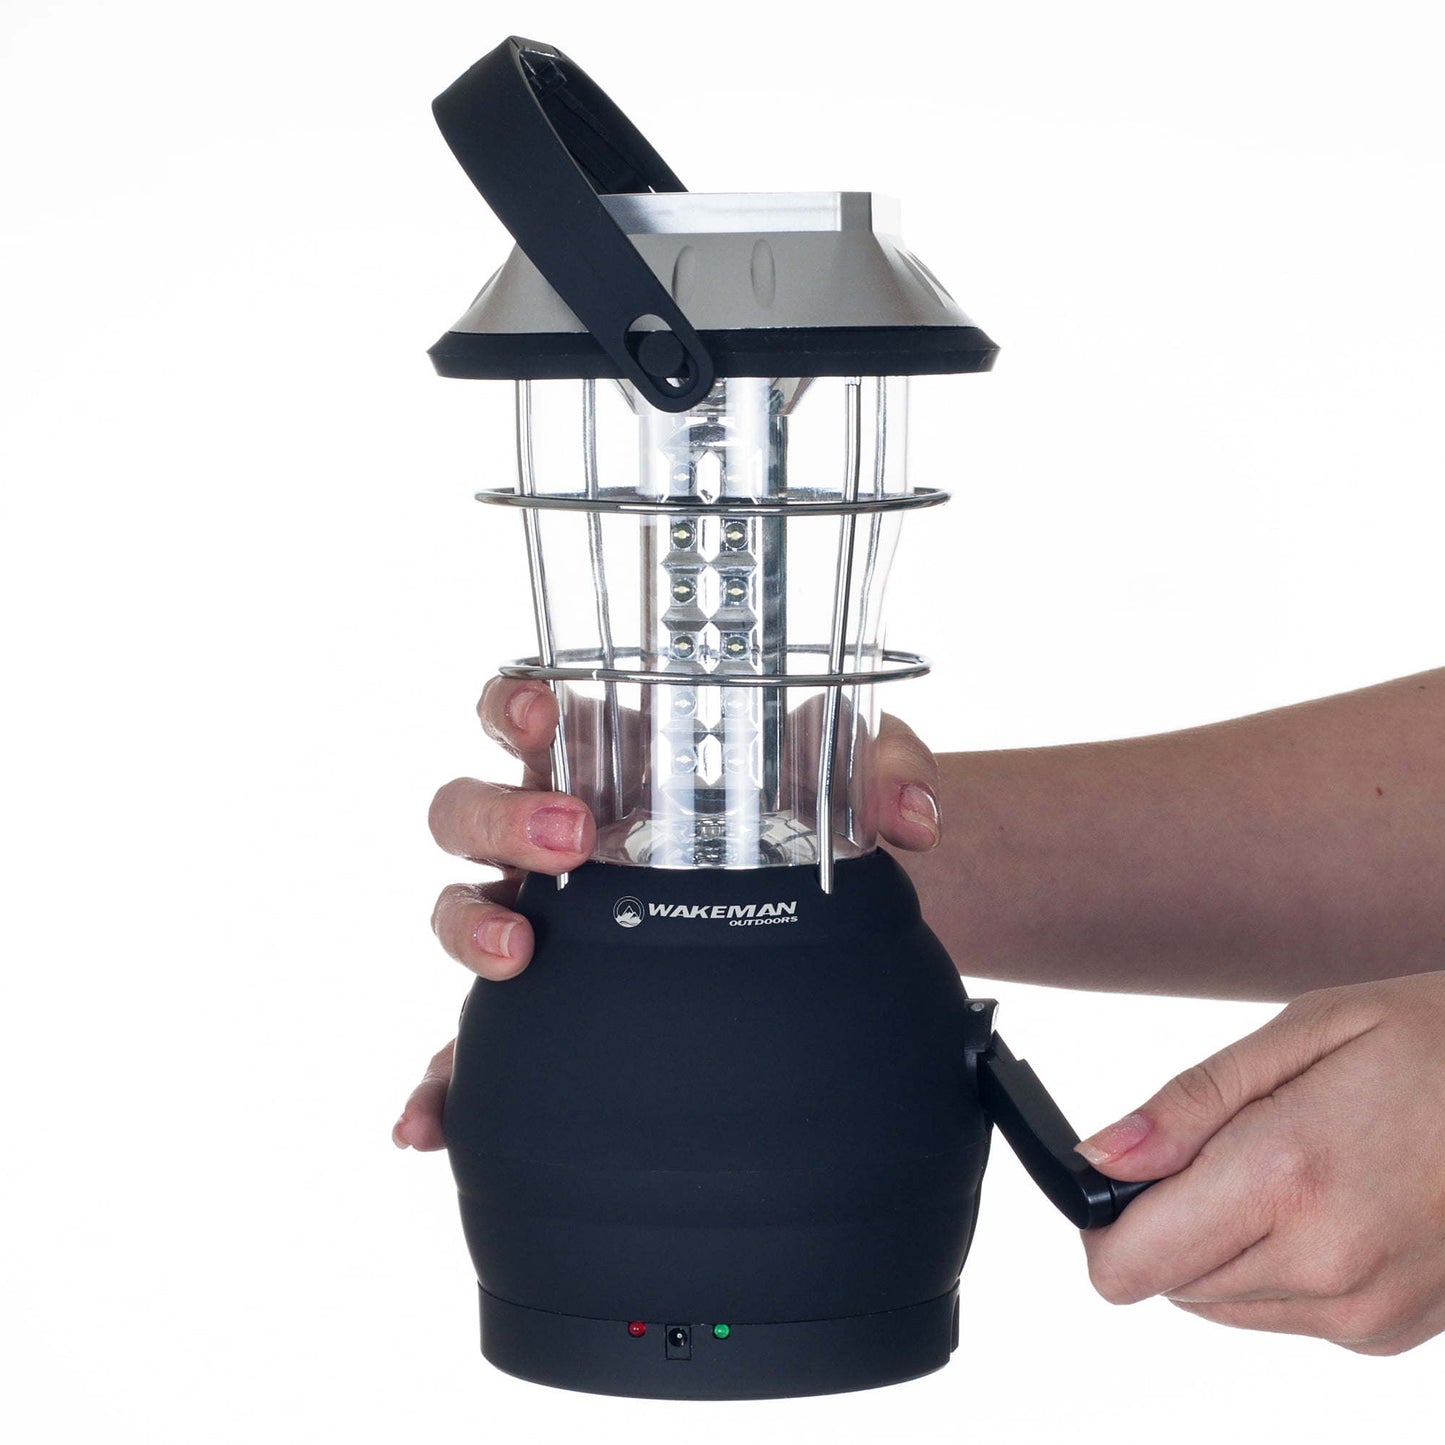 36 LED Solar and Dynamo Powered Camping Lantern by Whetstone